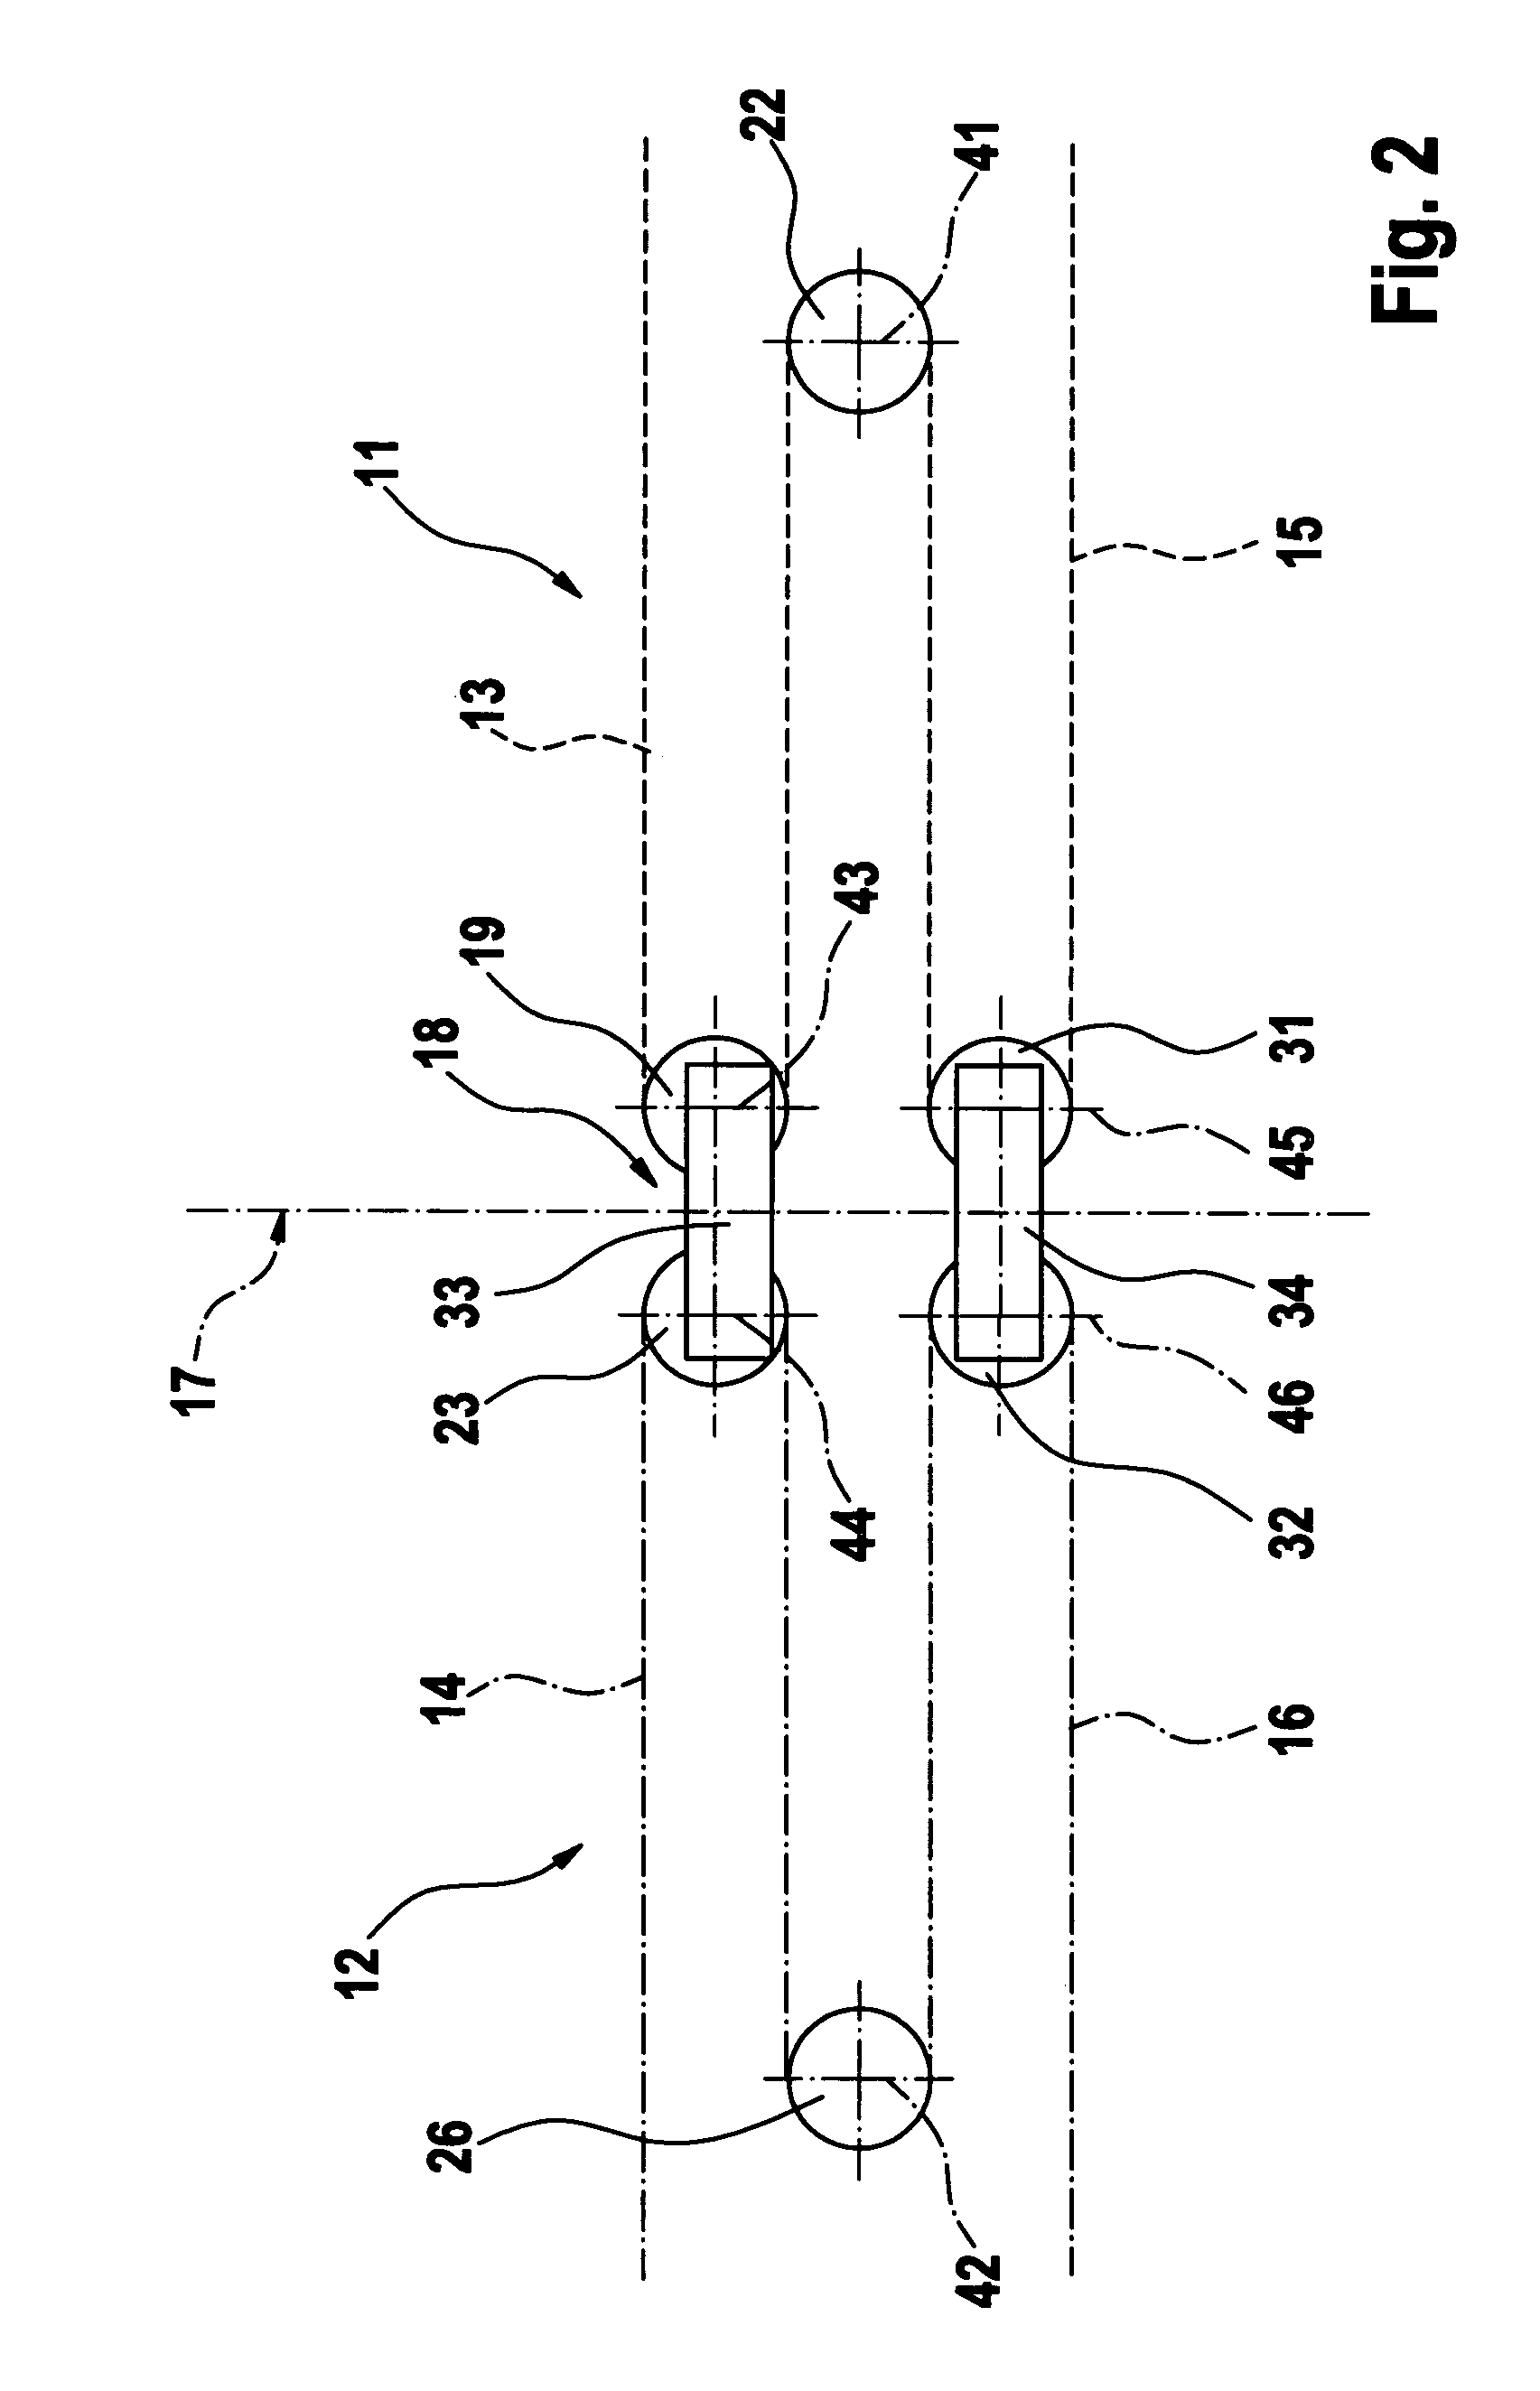 Apparatus and method for conveying objects transversely